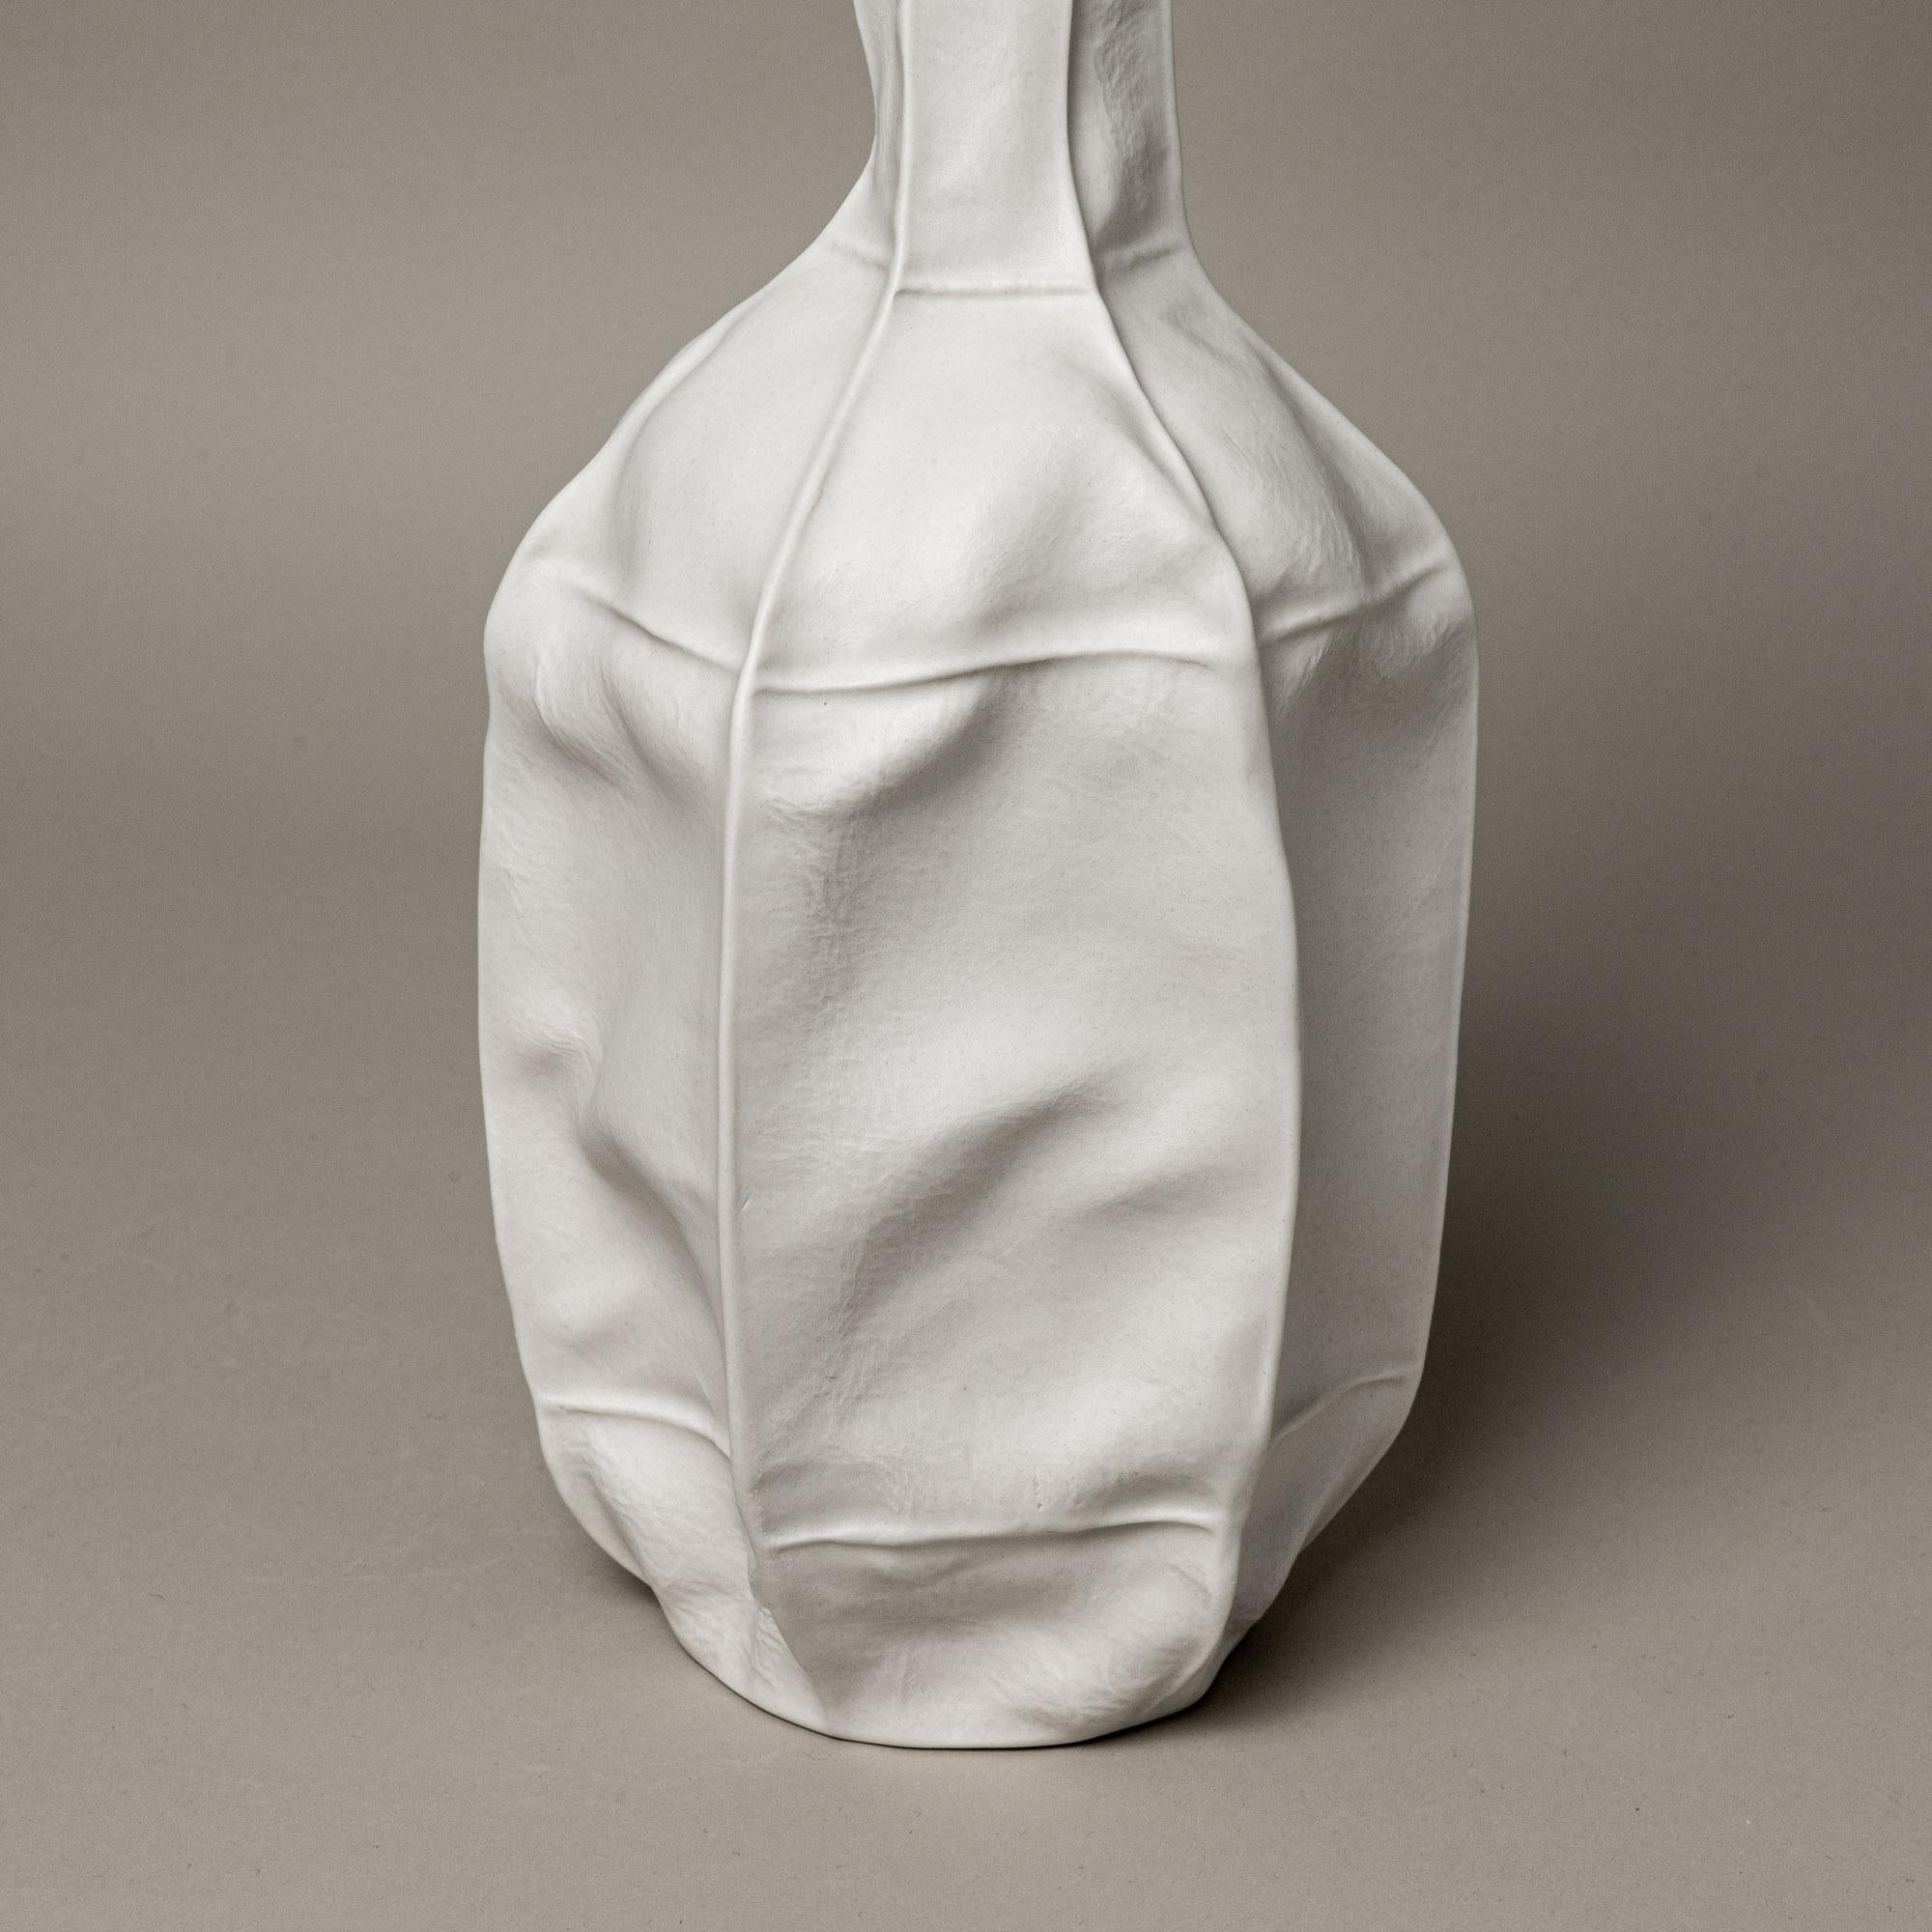 Pair of Sculptural White Ceramic Kawa Vase 12, Organic Modern porcelain In New Condition For Sale In Brooklyn, NY